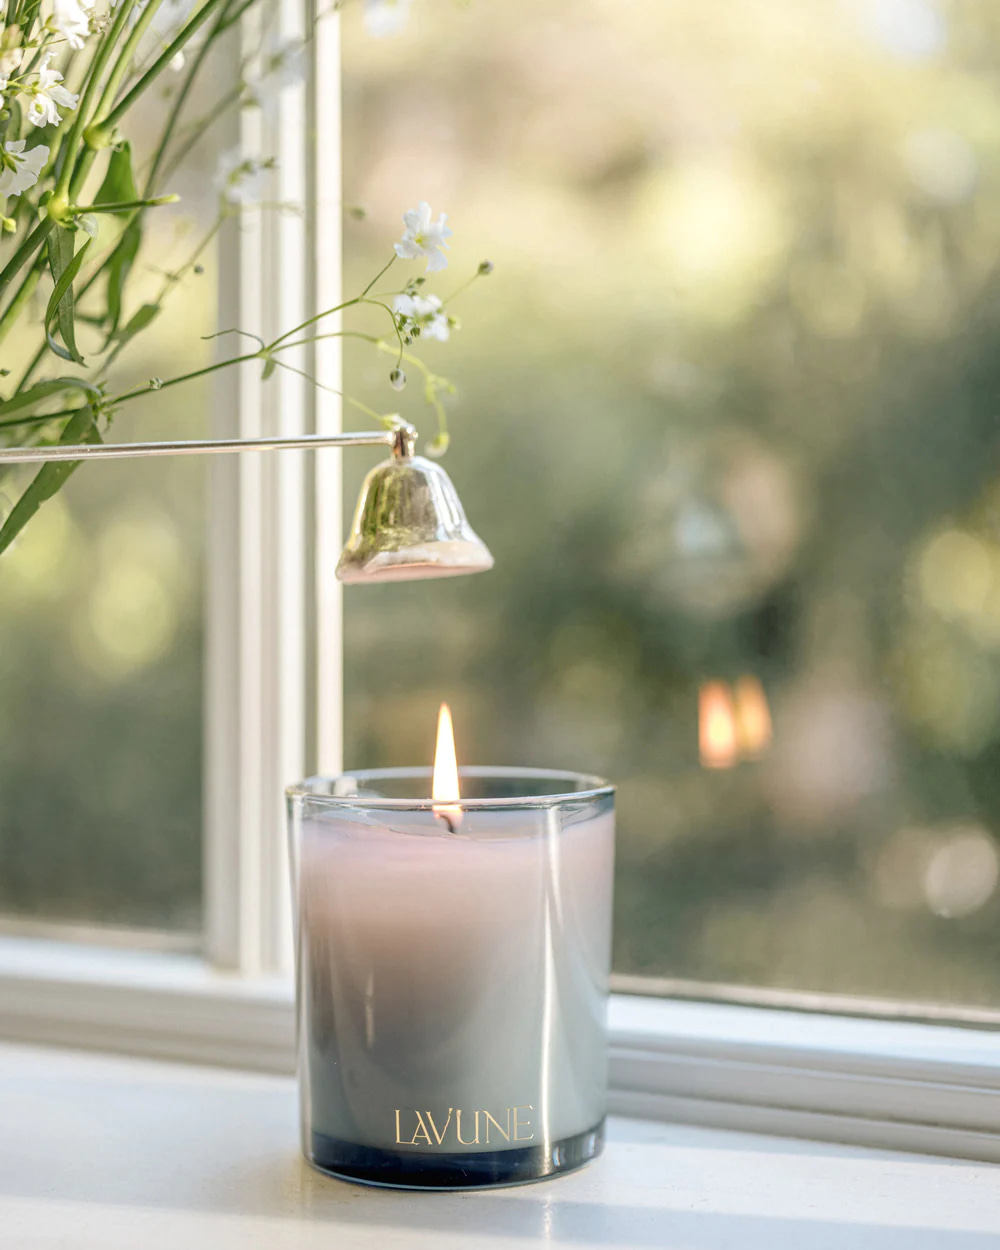 NEW CANDLE CAMPAIGN